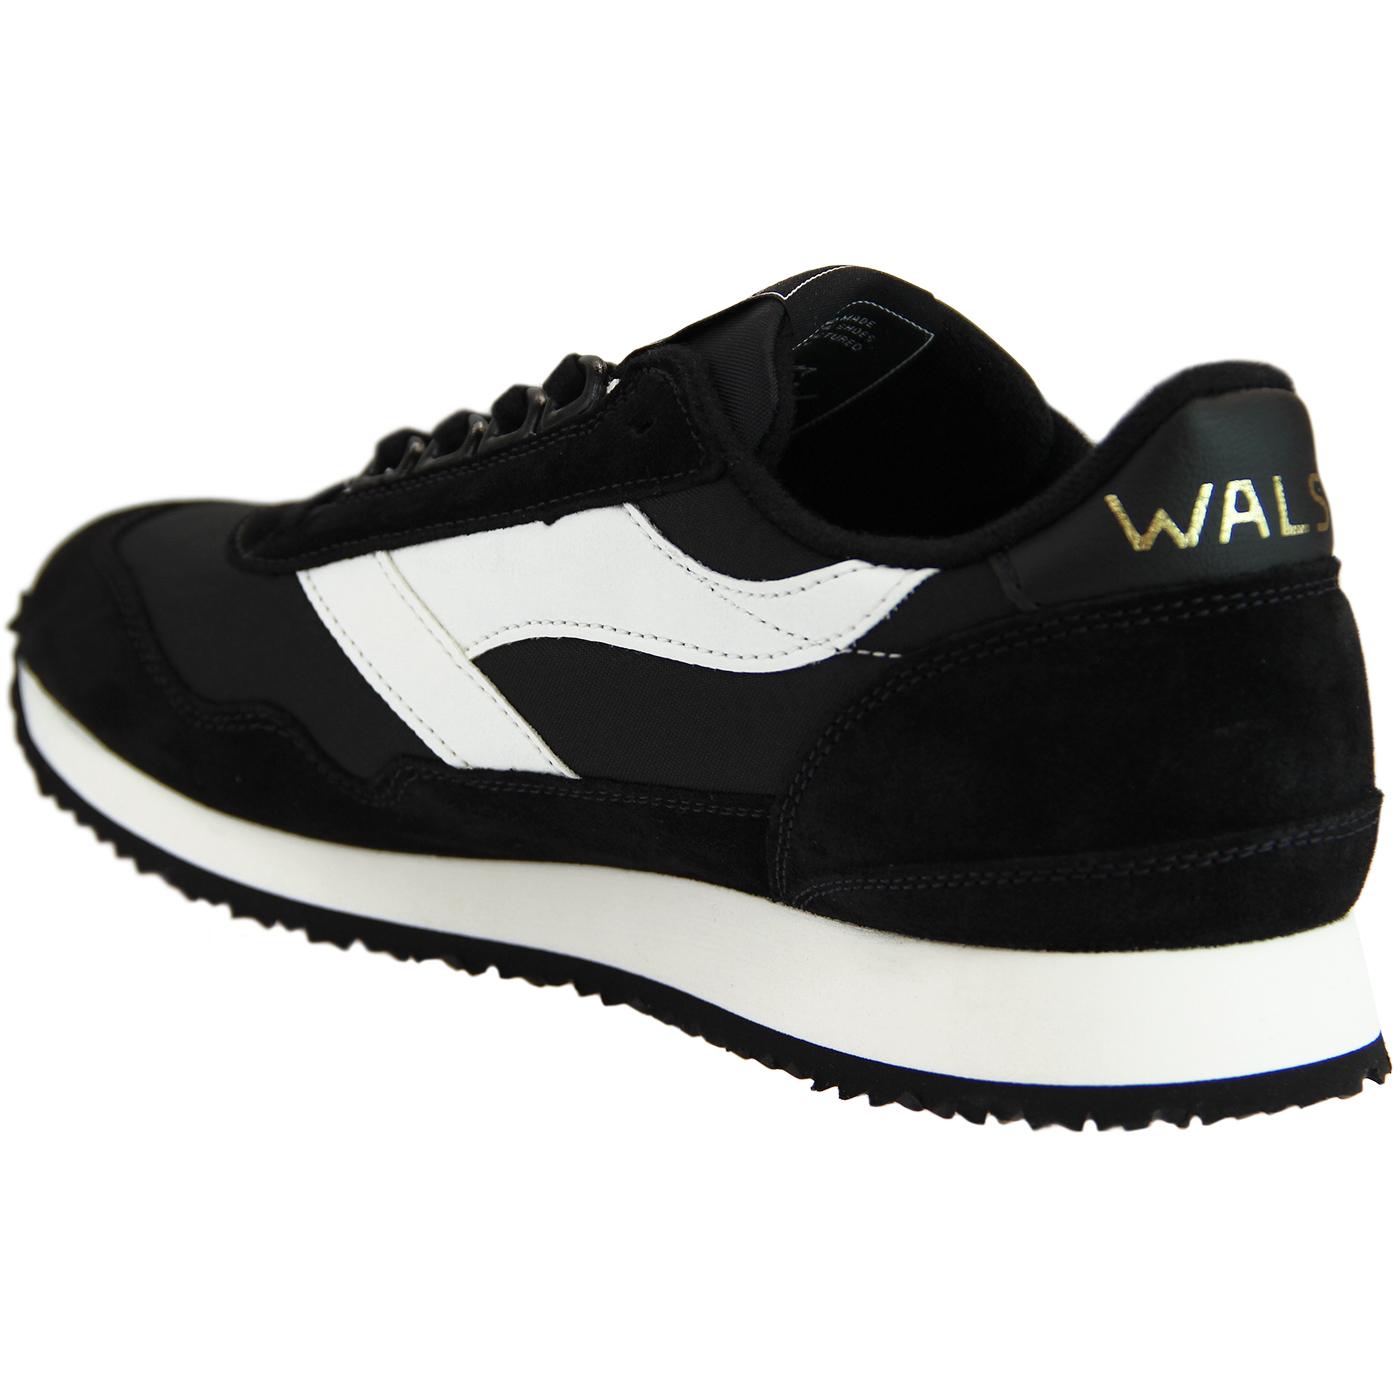 Ensign WALSH Made in England Retro Trainers in Black/White